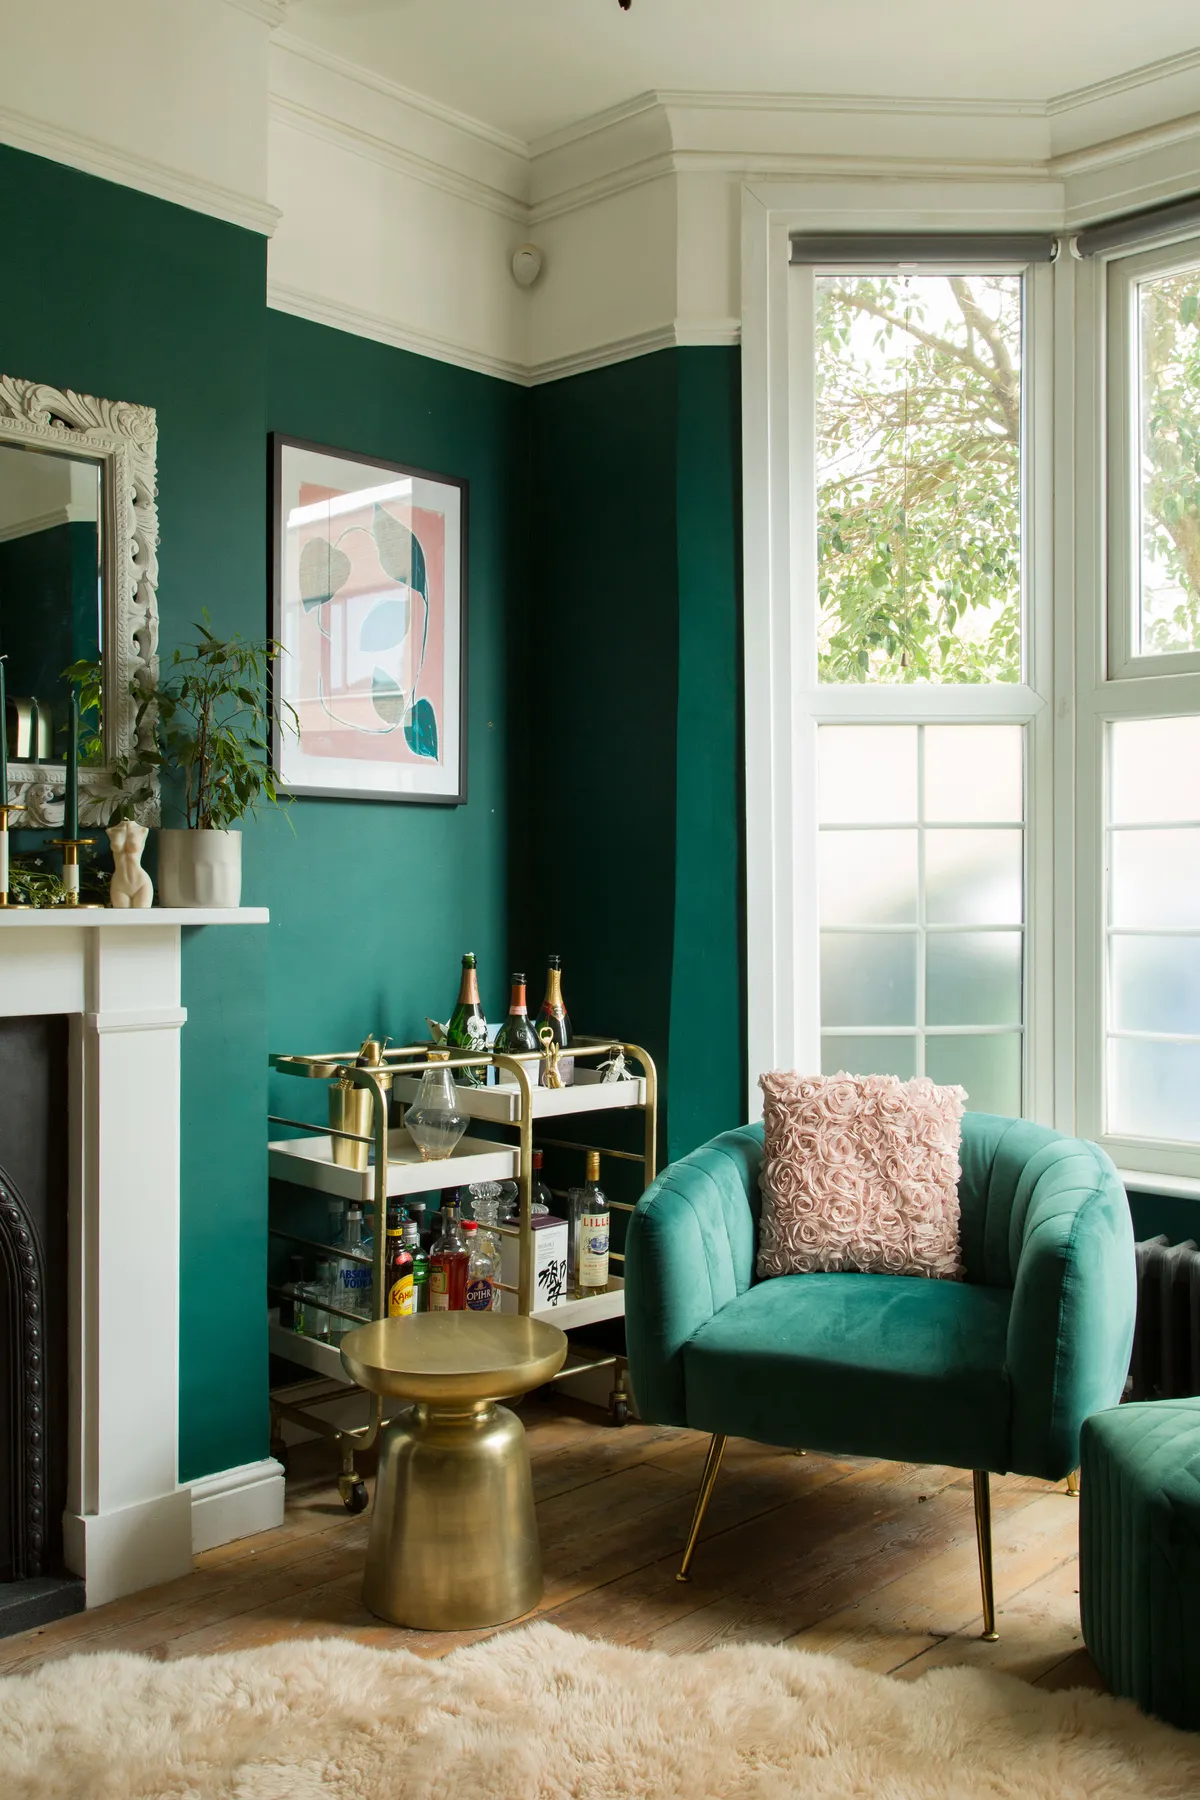 The combination of rich green, soft pink and matt gold makes for a luxe living room. As a restaurant inspired her scheme, it’s fitting that Kate has added a gold bar cart